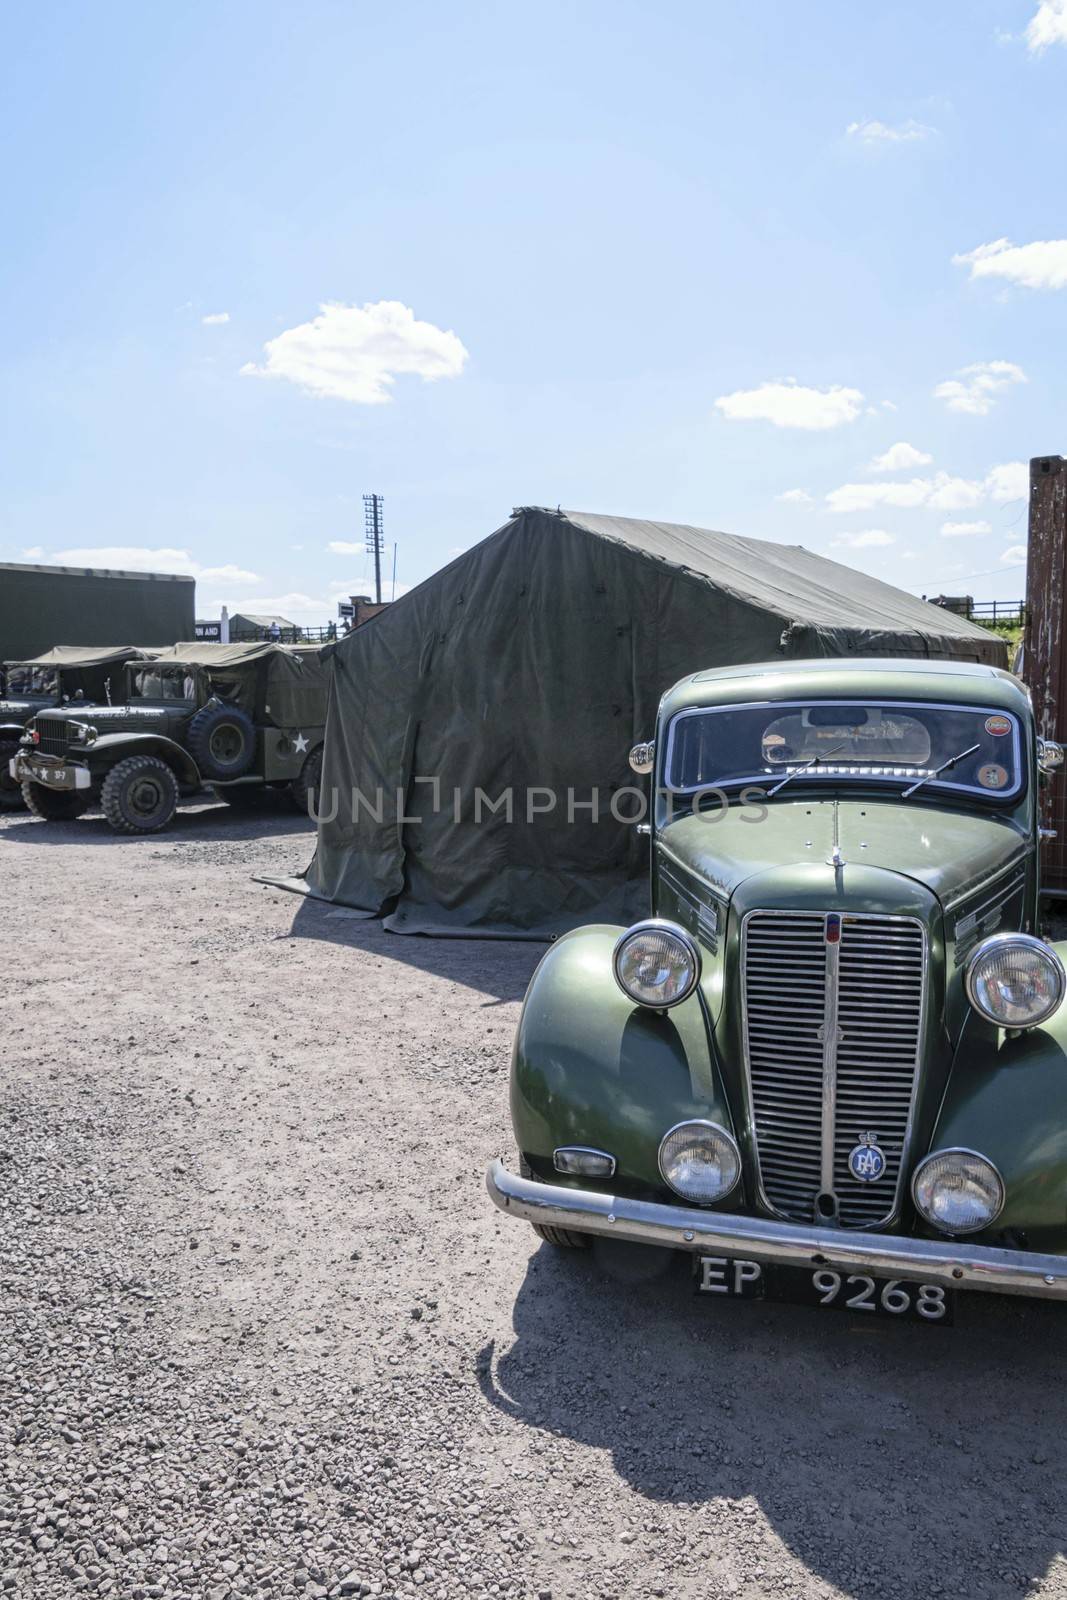 Vintage military vehicles parked outside of army tents	 by mrs_vision